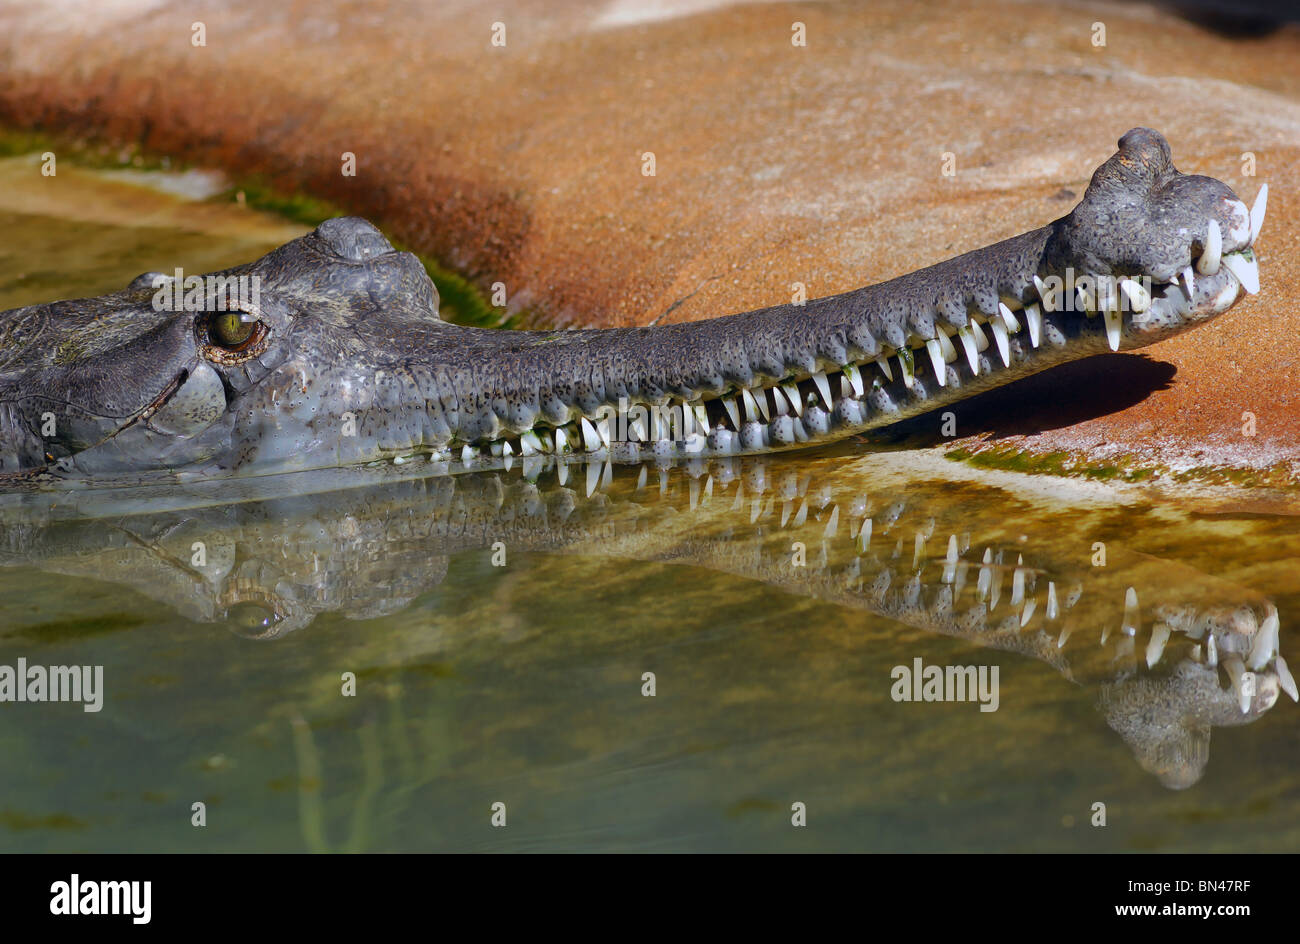 Instantly recognisable by its unique narrow snout the Gharial (Gavialis gangeticus) is also known as a Gavial. Stock Photo